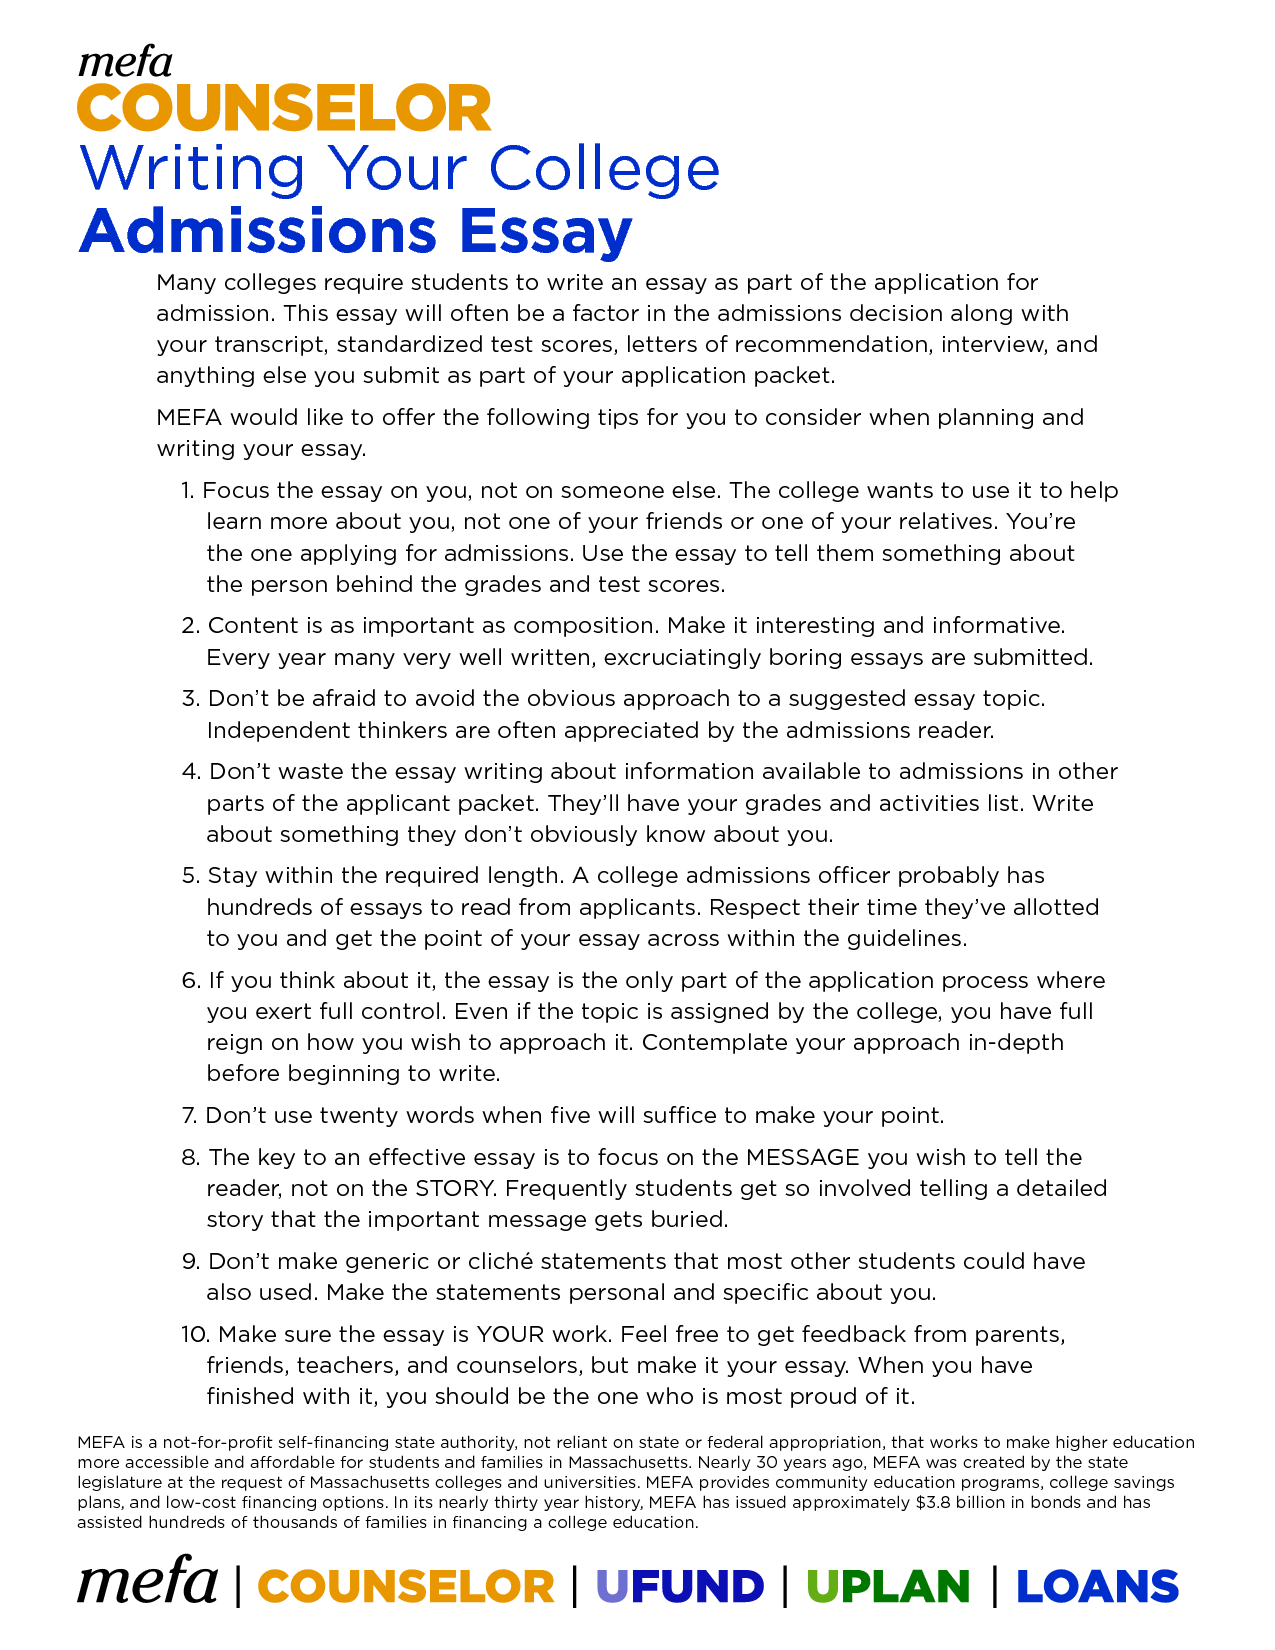 Tips for Writing an Effective Application Essay